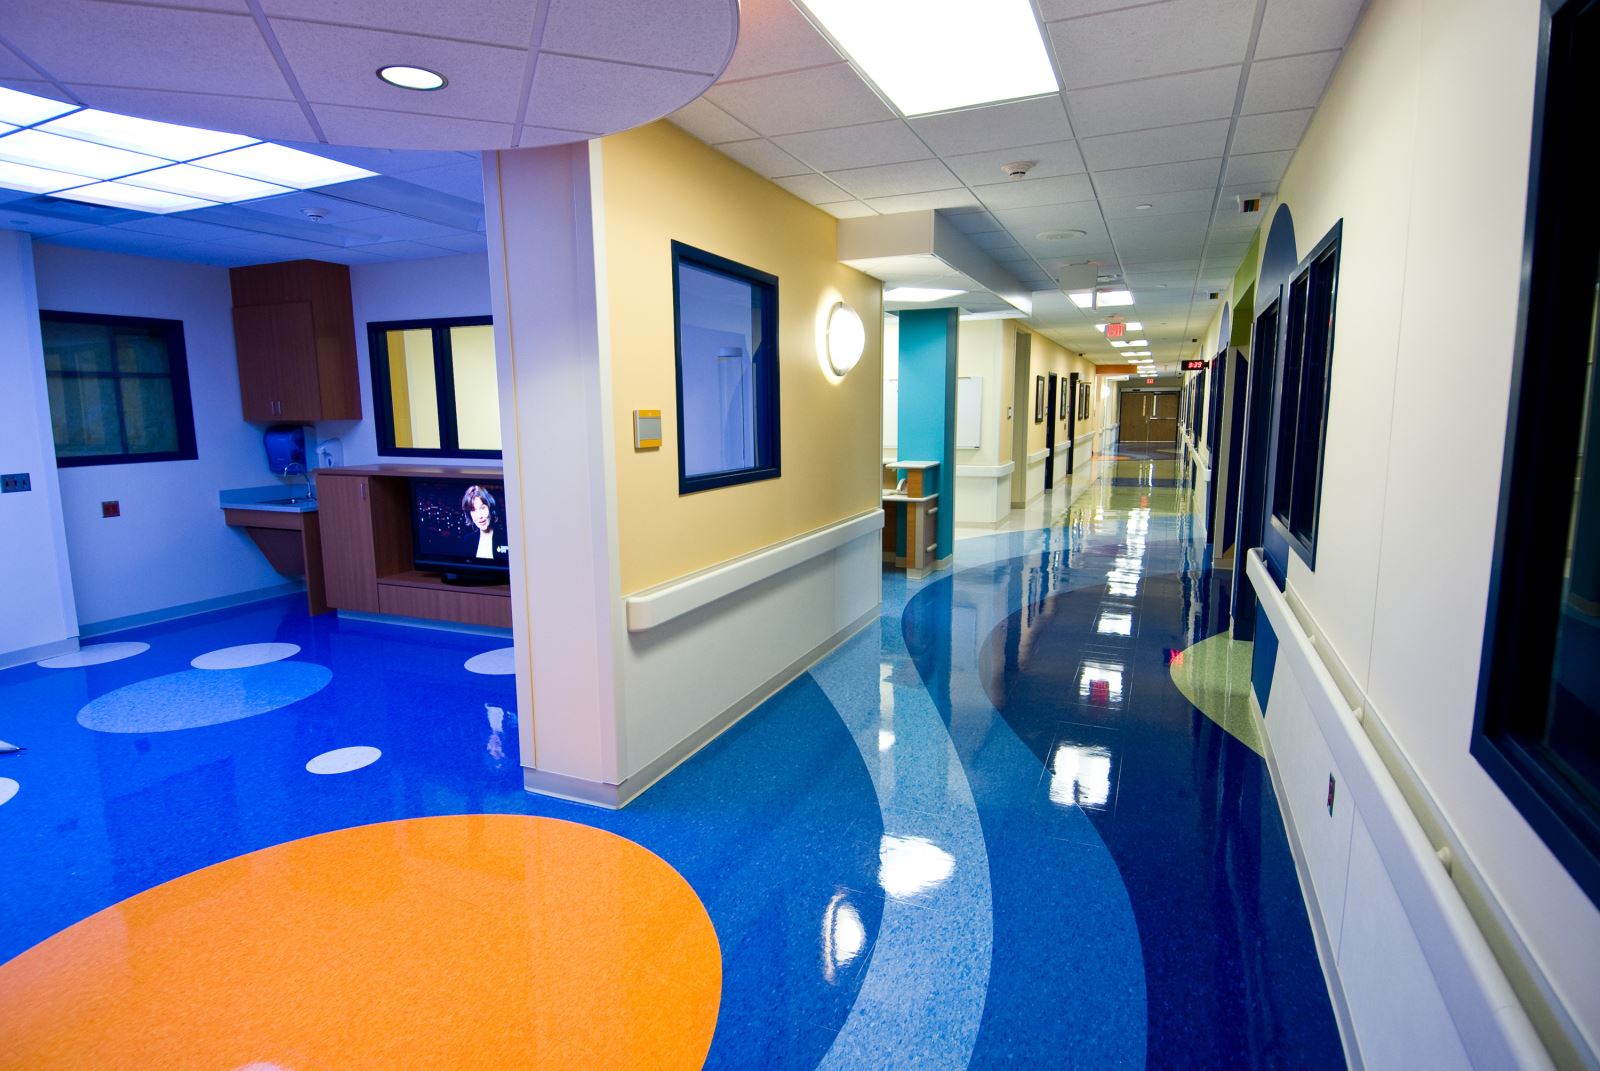 Hallway in the long-term care unit